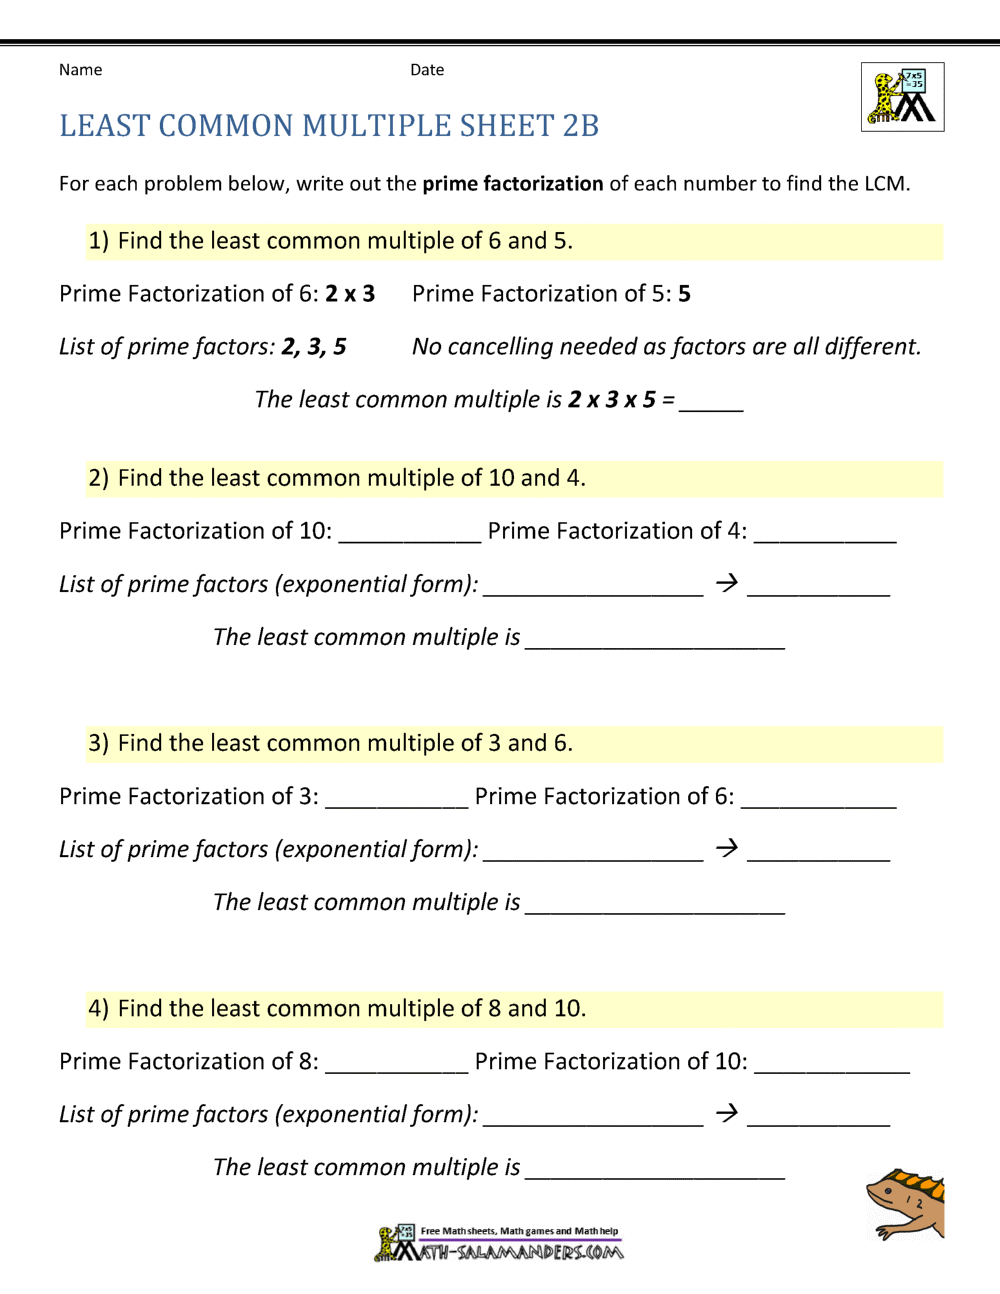 least-common-multiple-worksheets-page